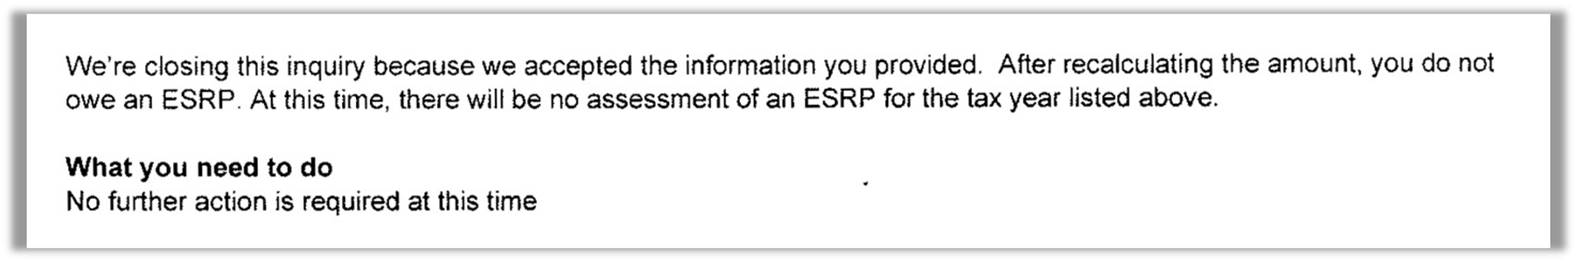 Letter 227 statement that you do not owe an ESRP.